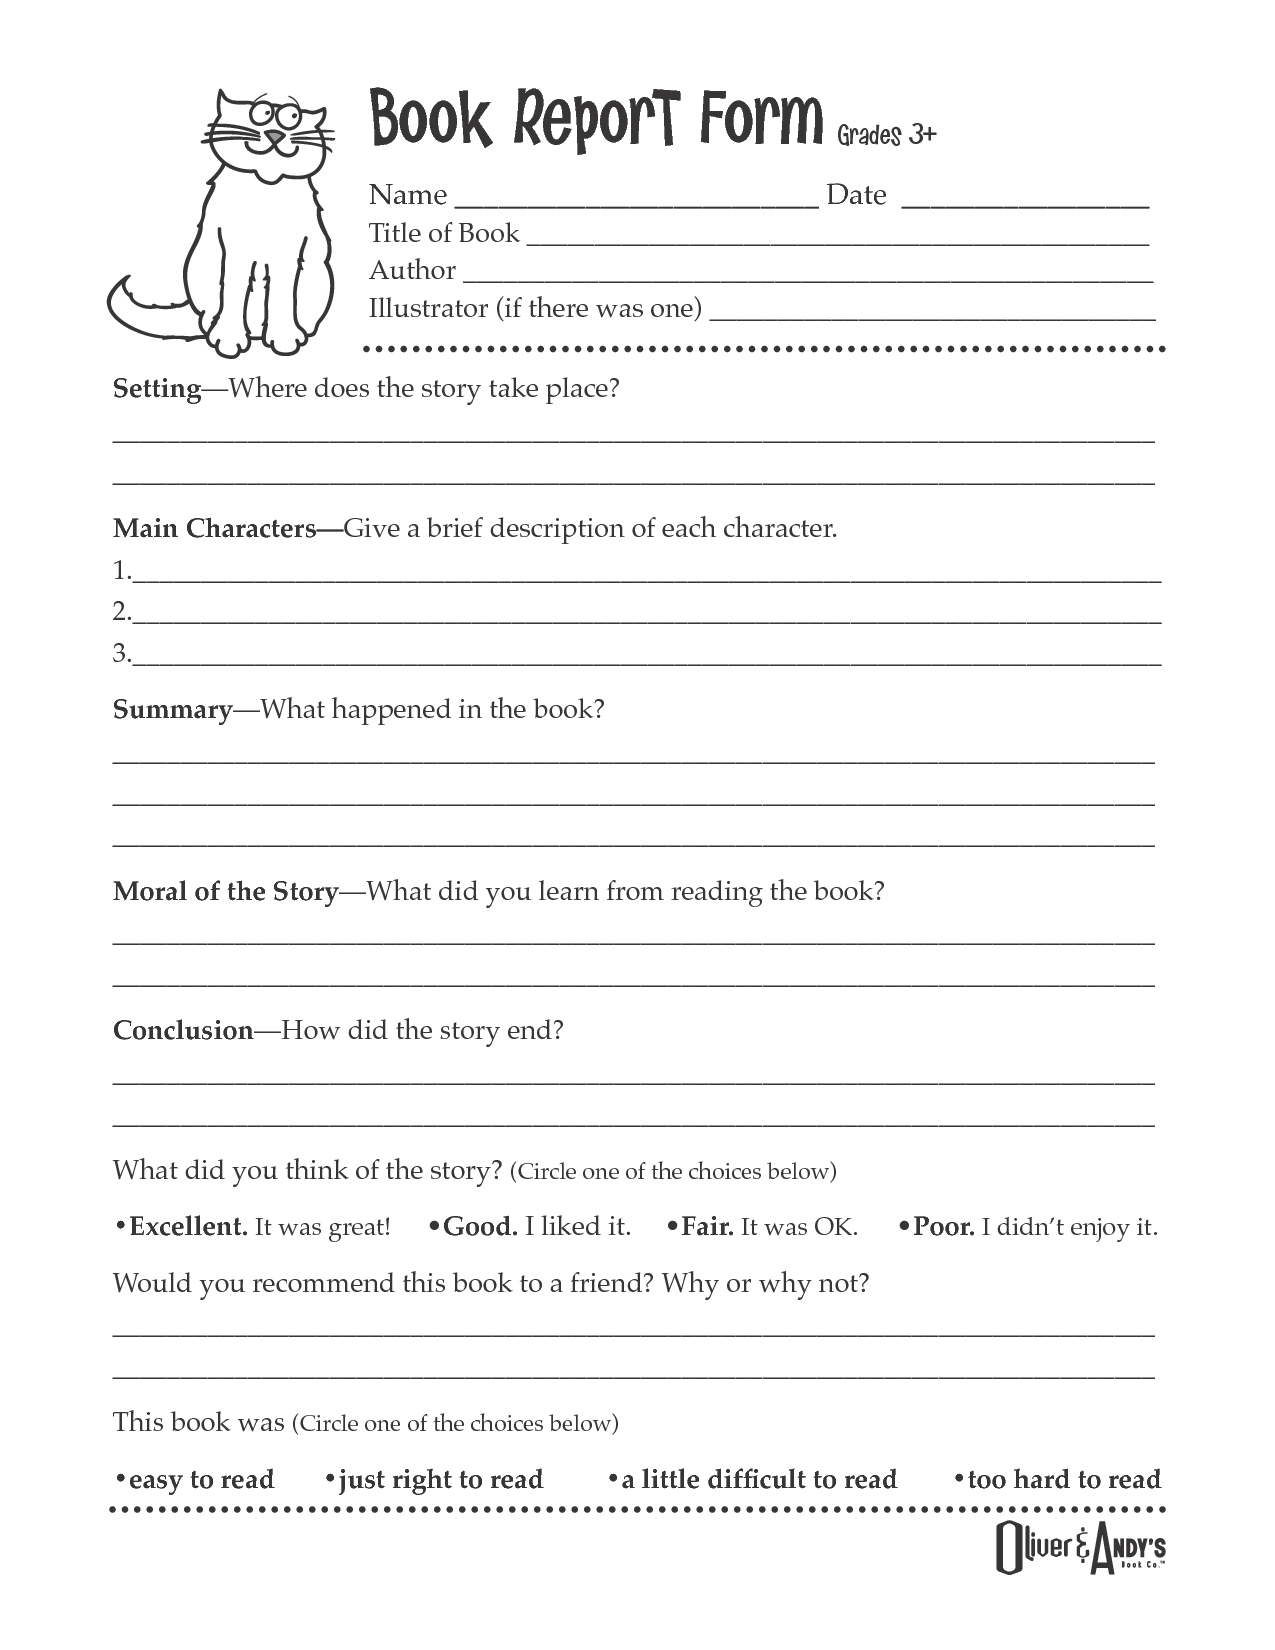 Free Research Paper Grader 1St Grade Writing | Ceolpub Throughout 1St Grade Book Report Template